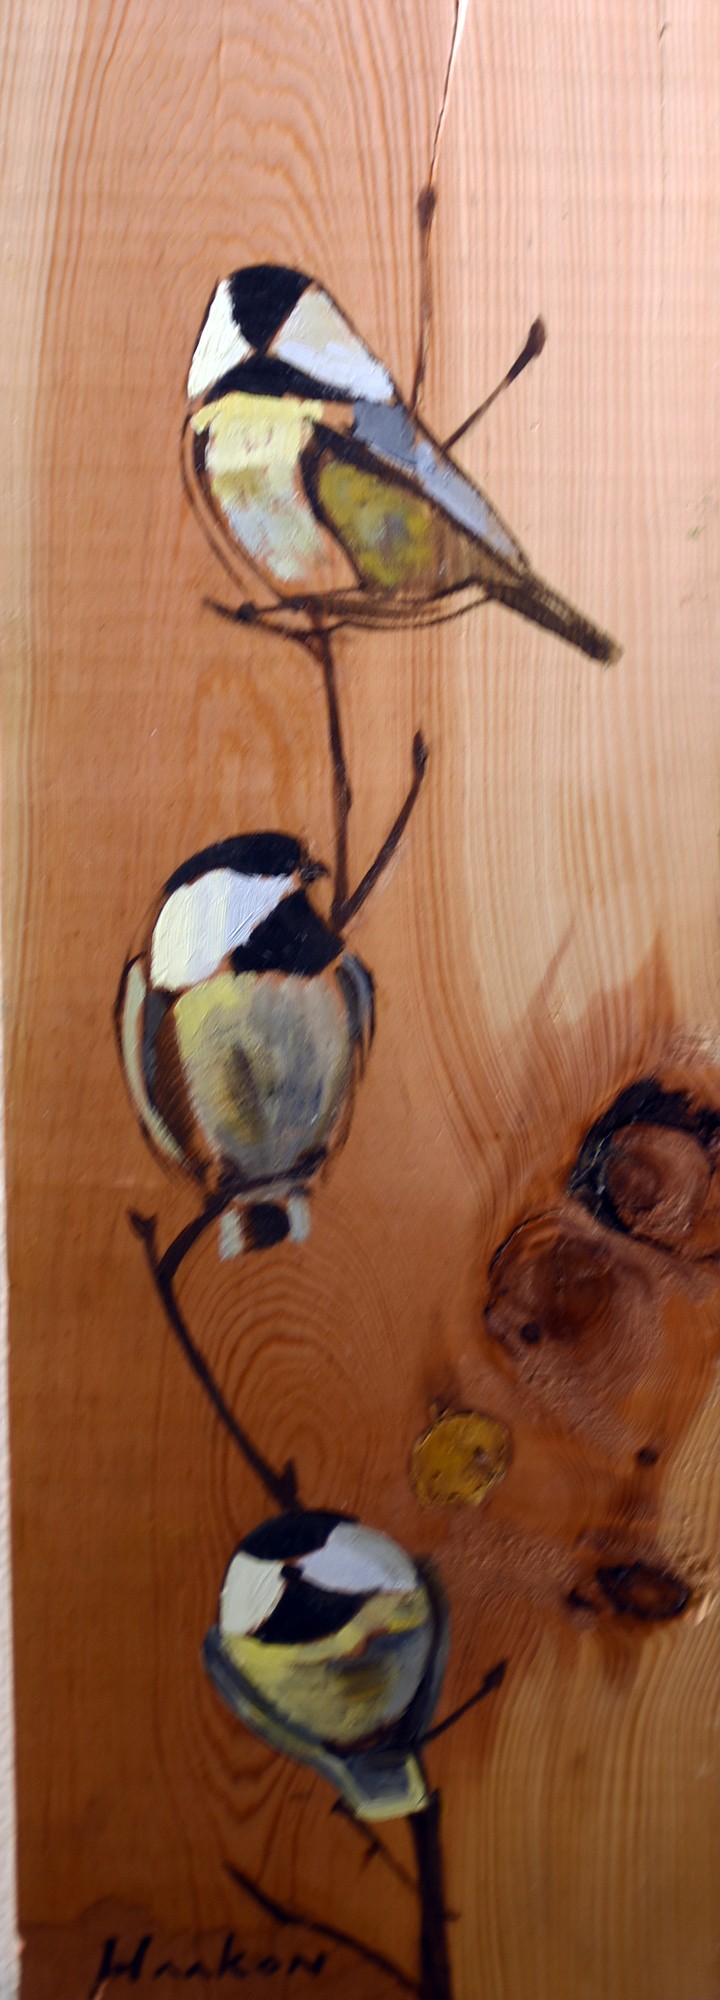 &#147;Chickadees,&#148; an oil painting on Doulas Fir by Haakon Ensign.
(Brenda Ahearn/This Week in the Flathead)